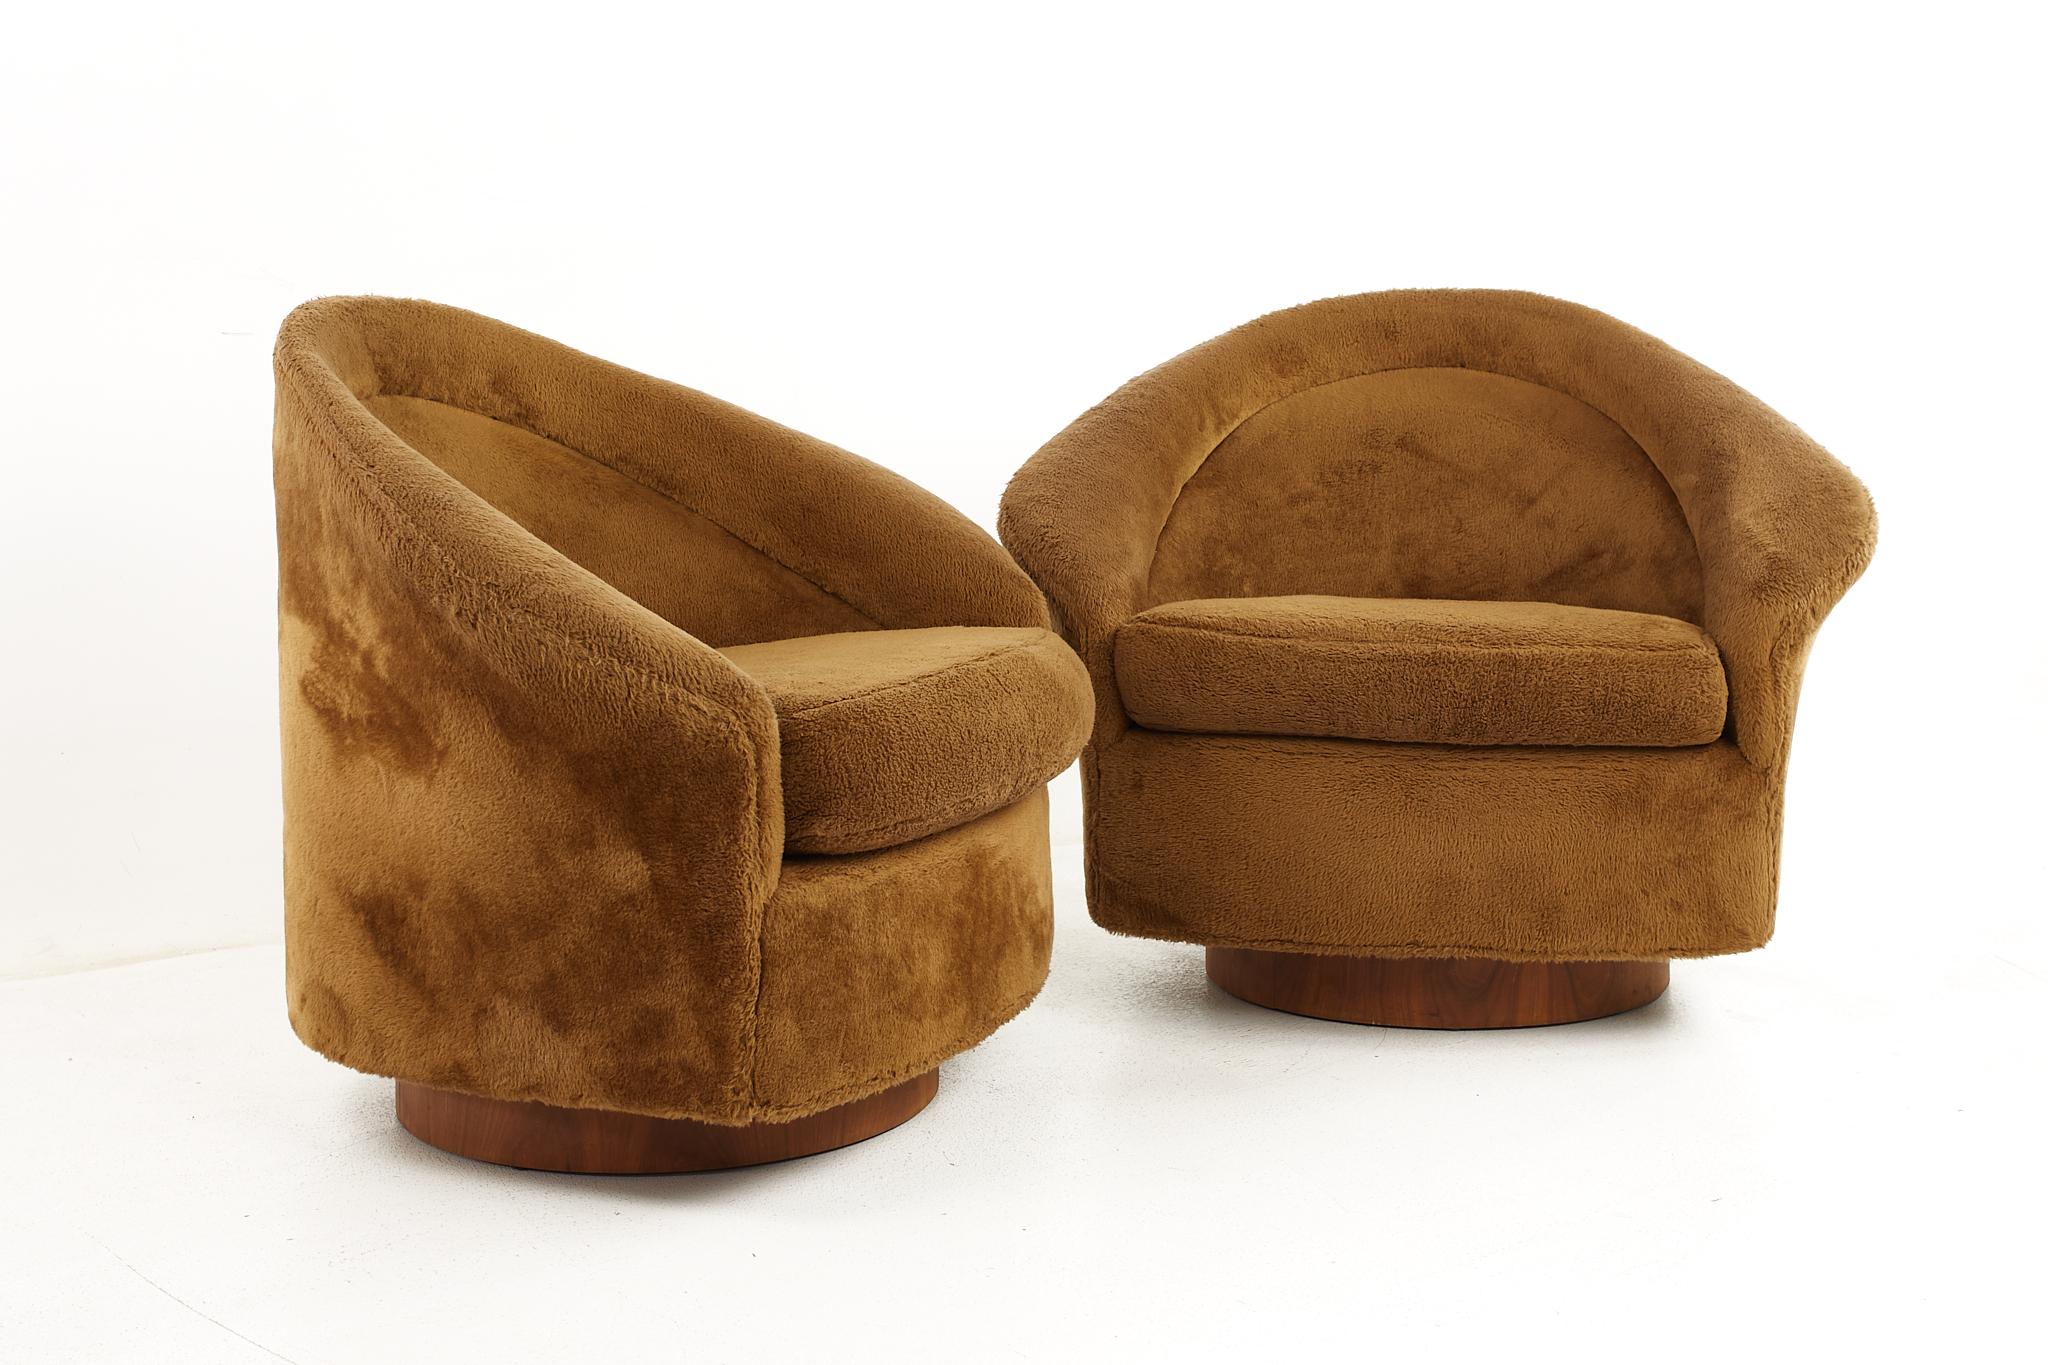 Adrian Pearsall for Craft Associates mid century swivel walnut lounge chairs - a pair

Each chair measures: 38 wide x 28 deep x 30.5 high, with a seat height of 17 and arm height of 22 inches

All pieces of furniture can be had in what we call